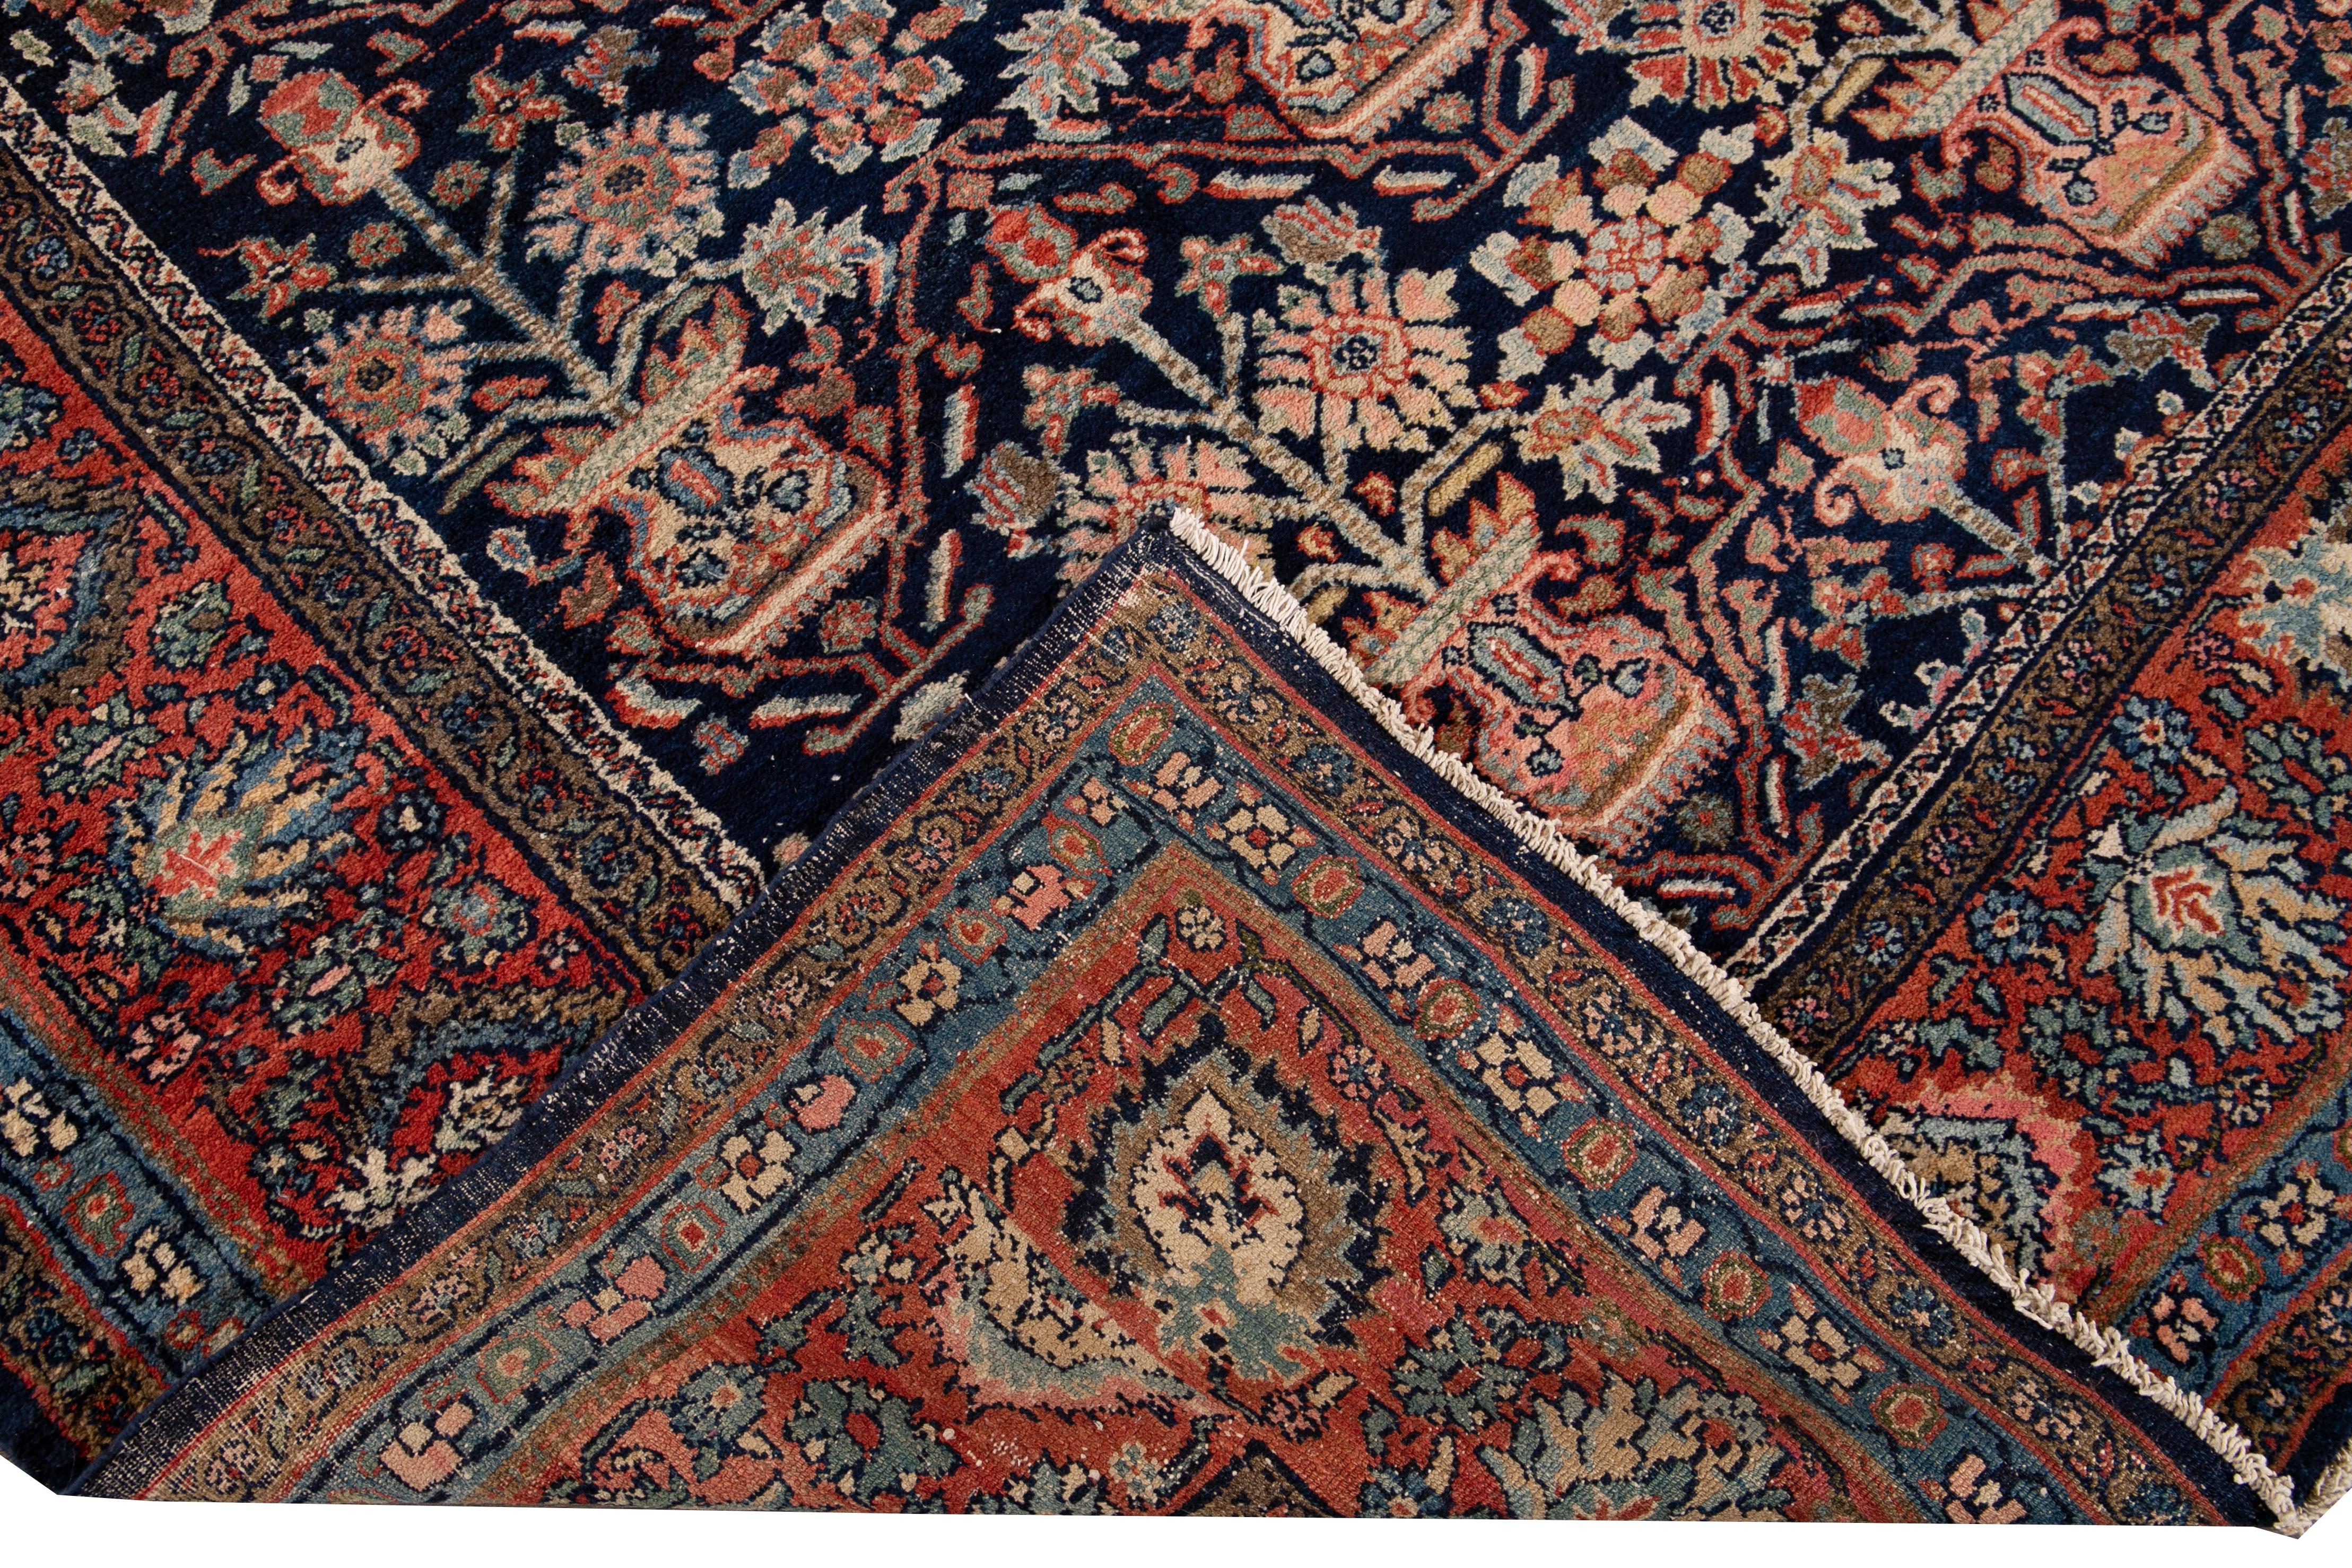 Beautiful vintage Persian Malayer hand knotted wool rug with a blue field. This Malayer rug has a red frame and multi-color accents in an all-over geometric Botanical design.

This rug measures: 9'3